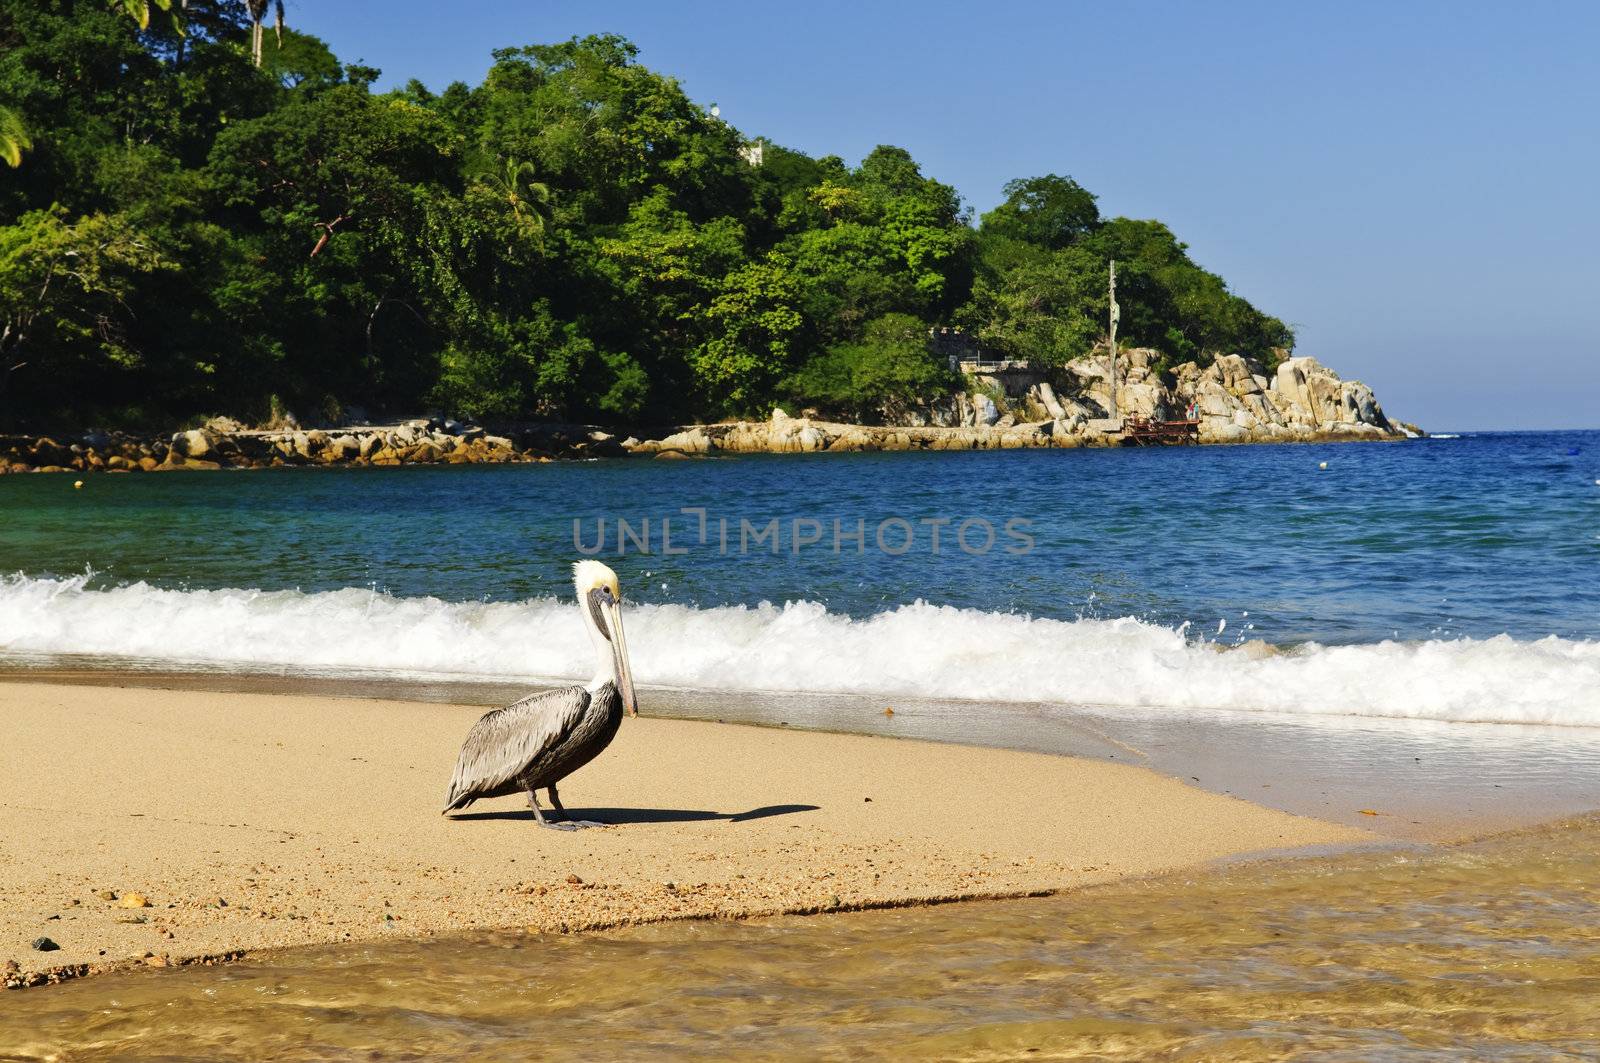 Pelican on beach in Mexico by elenathewise